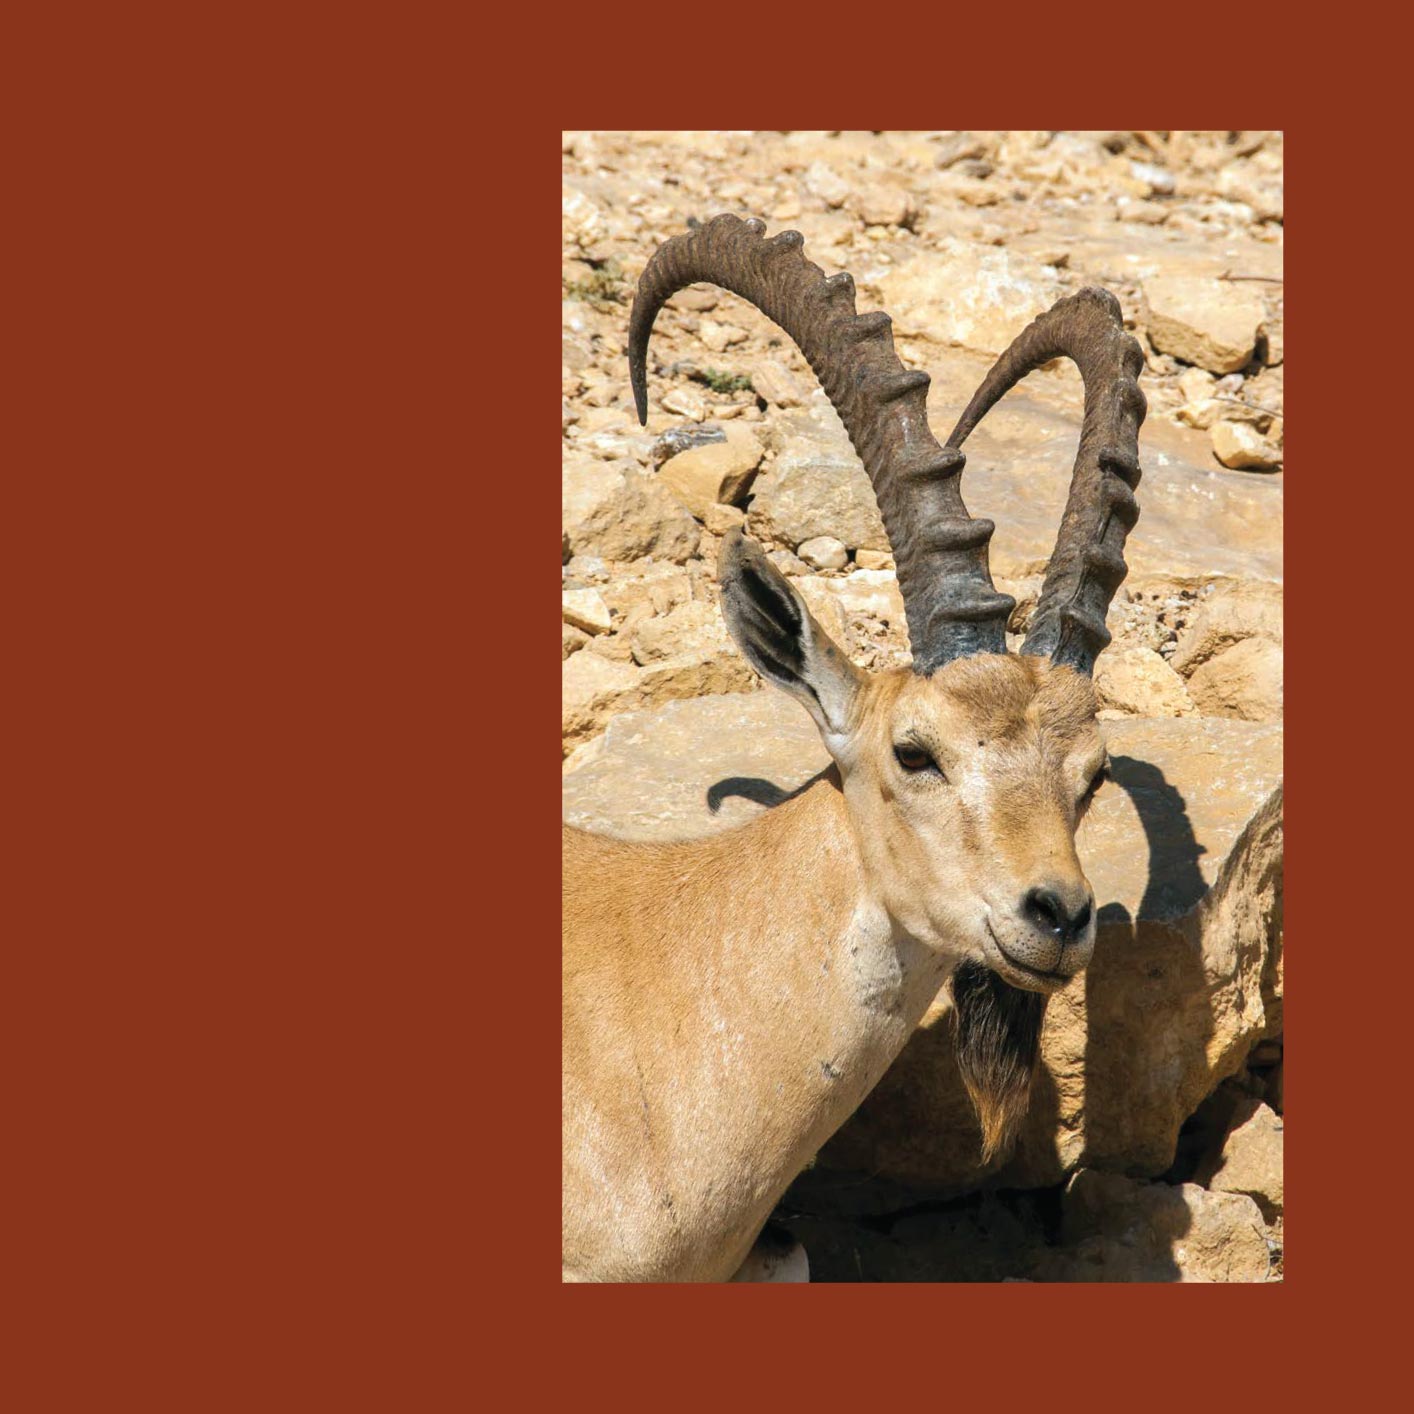 As we hike along a desert trail I see an animal with big curved horns - photo 10